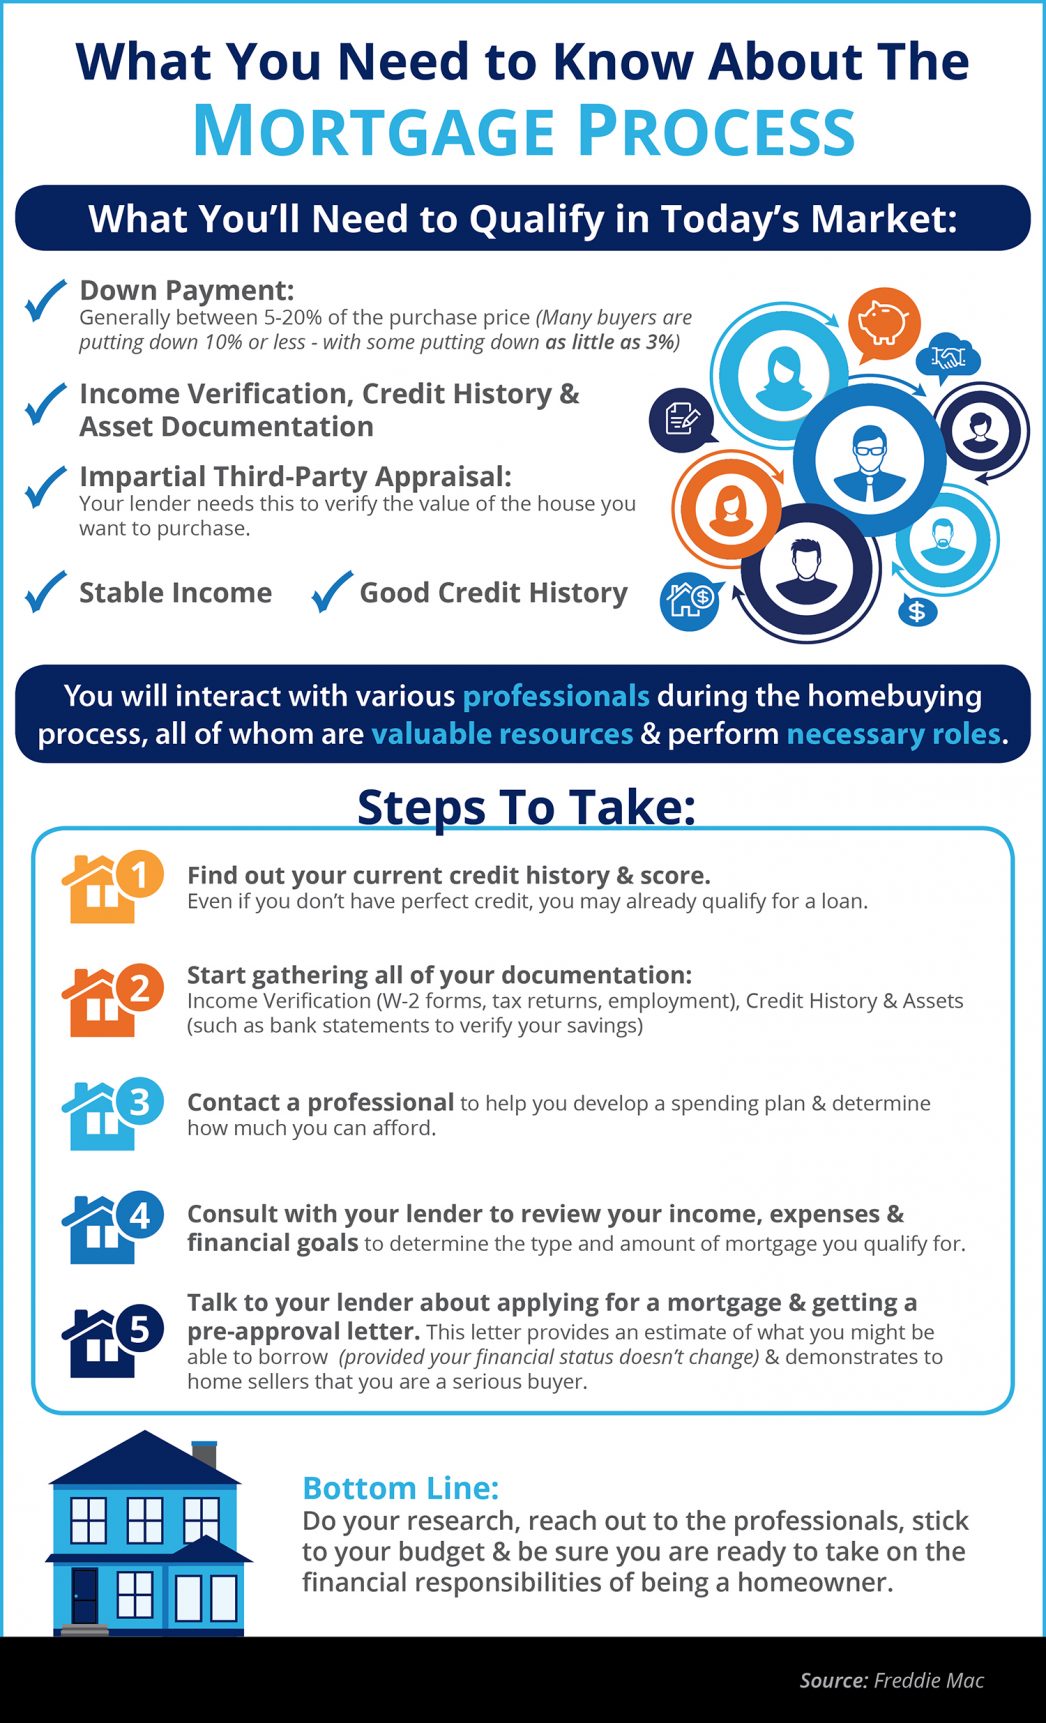 What You Need to Know About Qualifying for a Mortgage [INFOGRAPHIC] | MyKCM